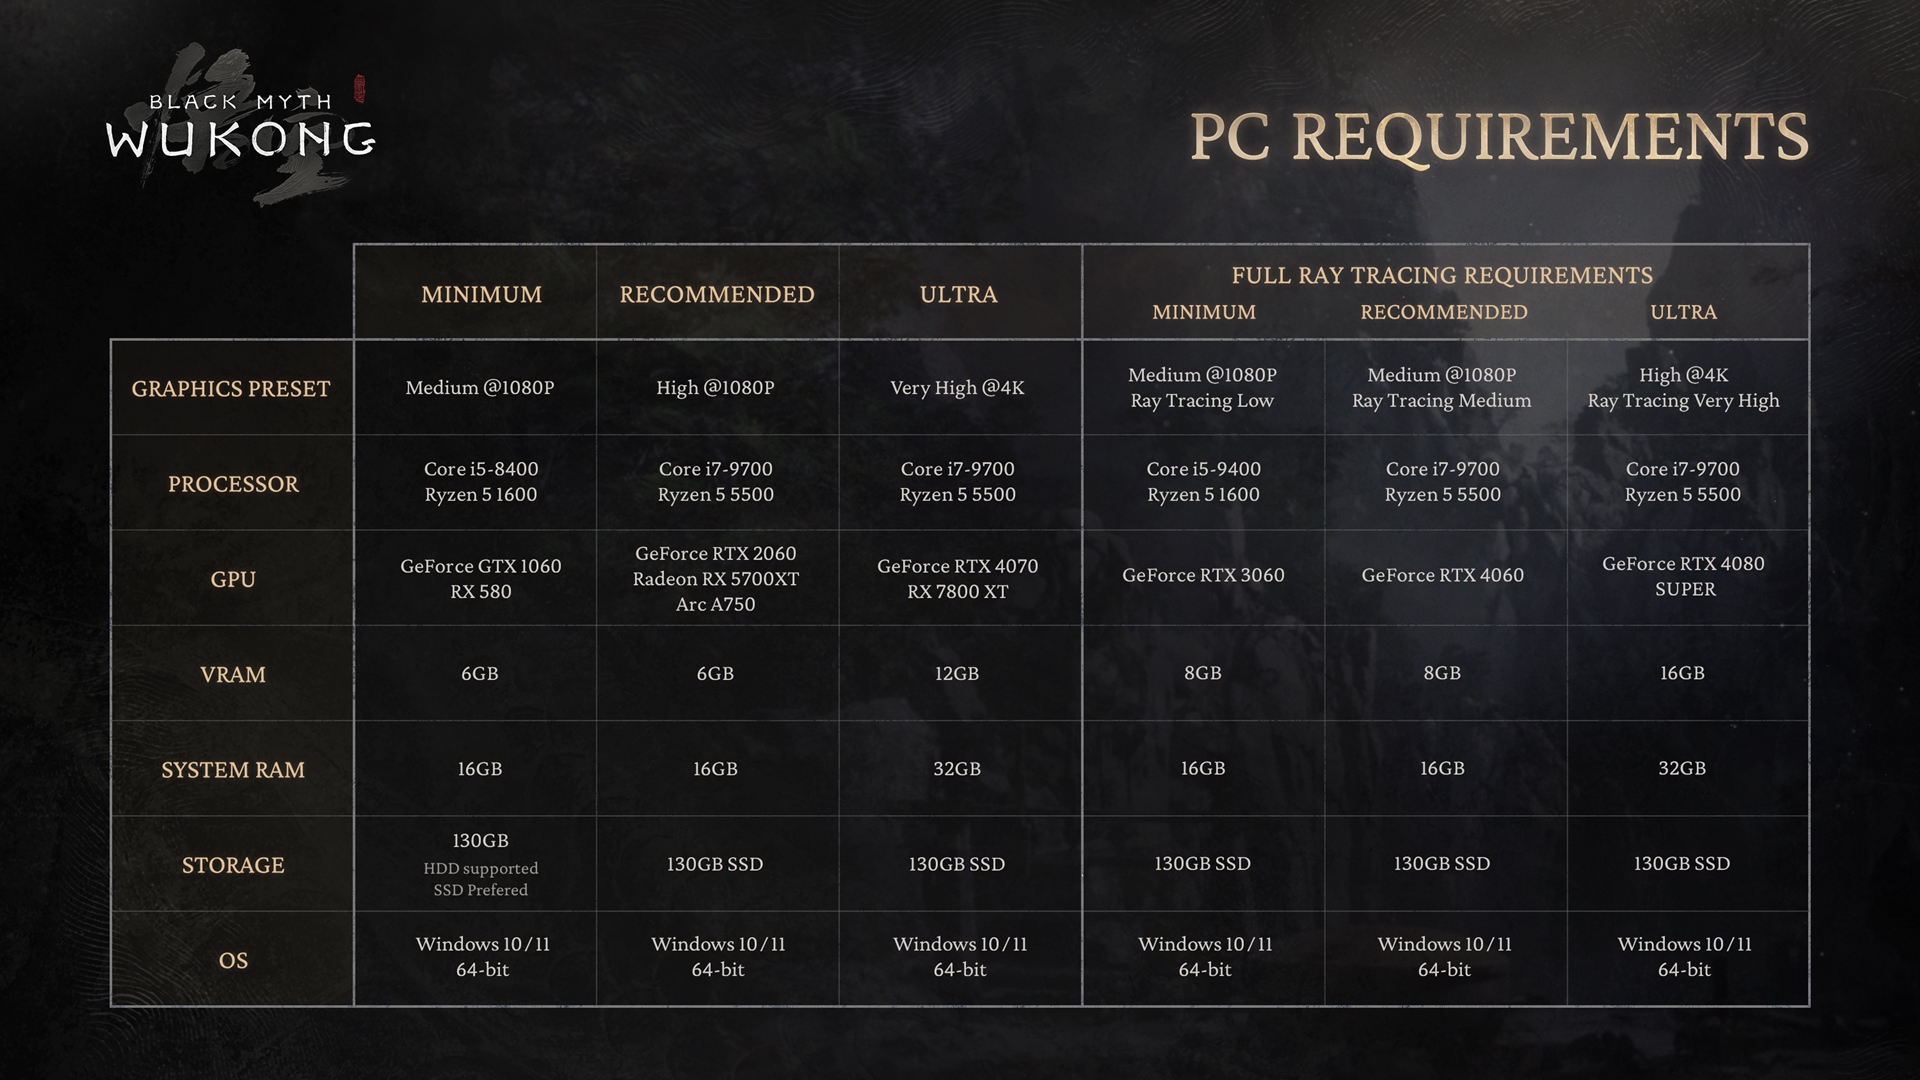 Minimum and recommended requirements to run Black Myth: Wukong on PC.